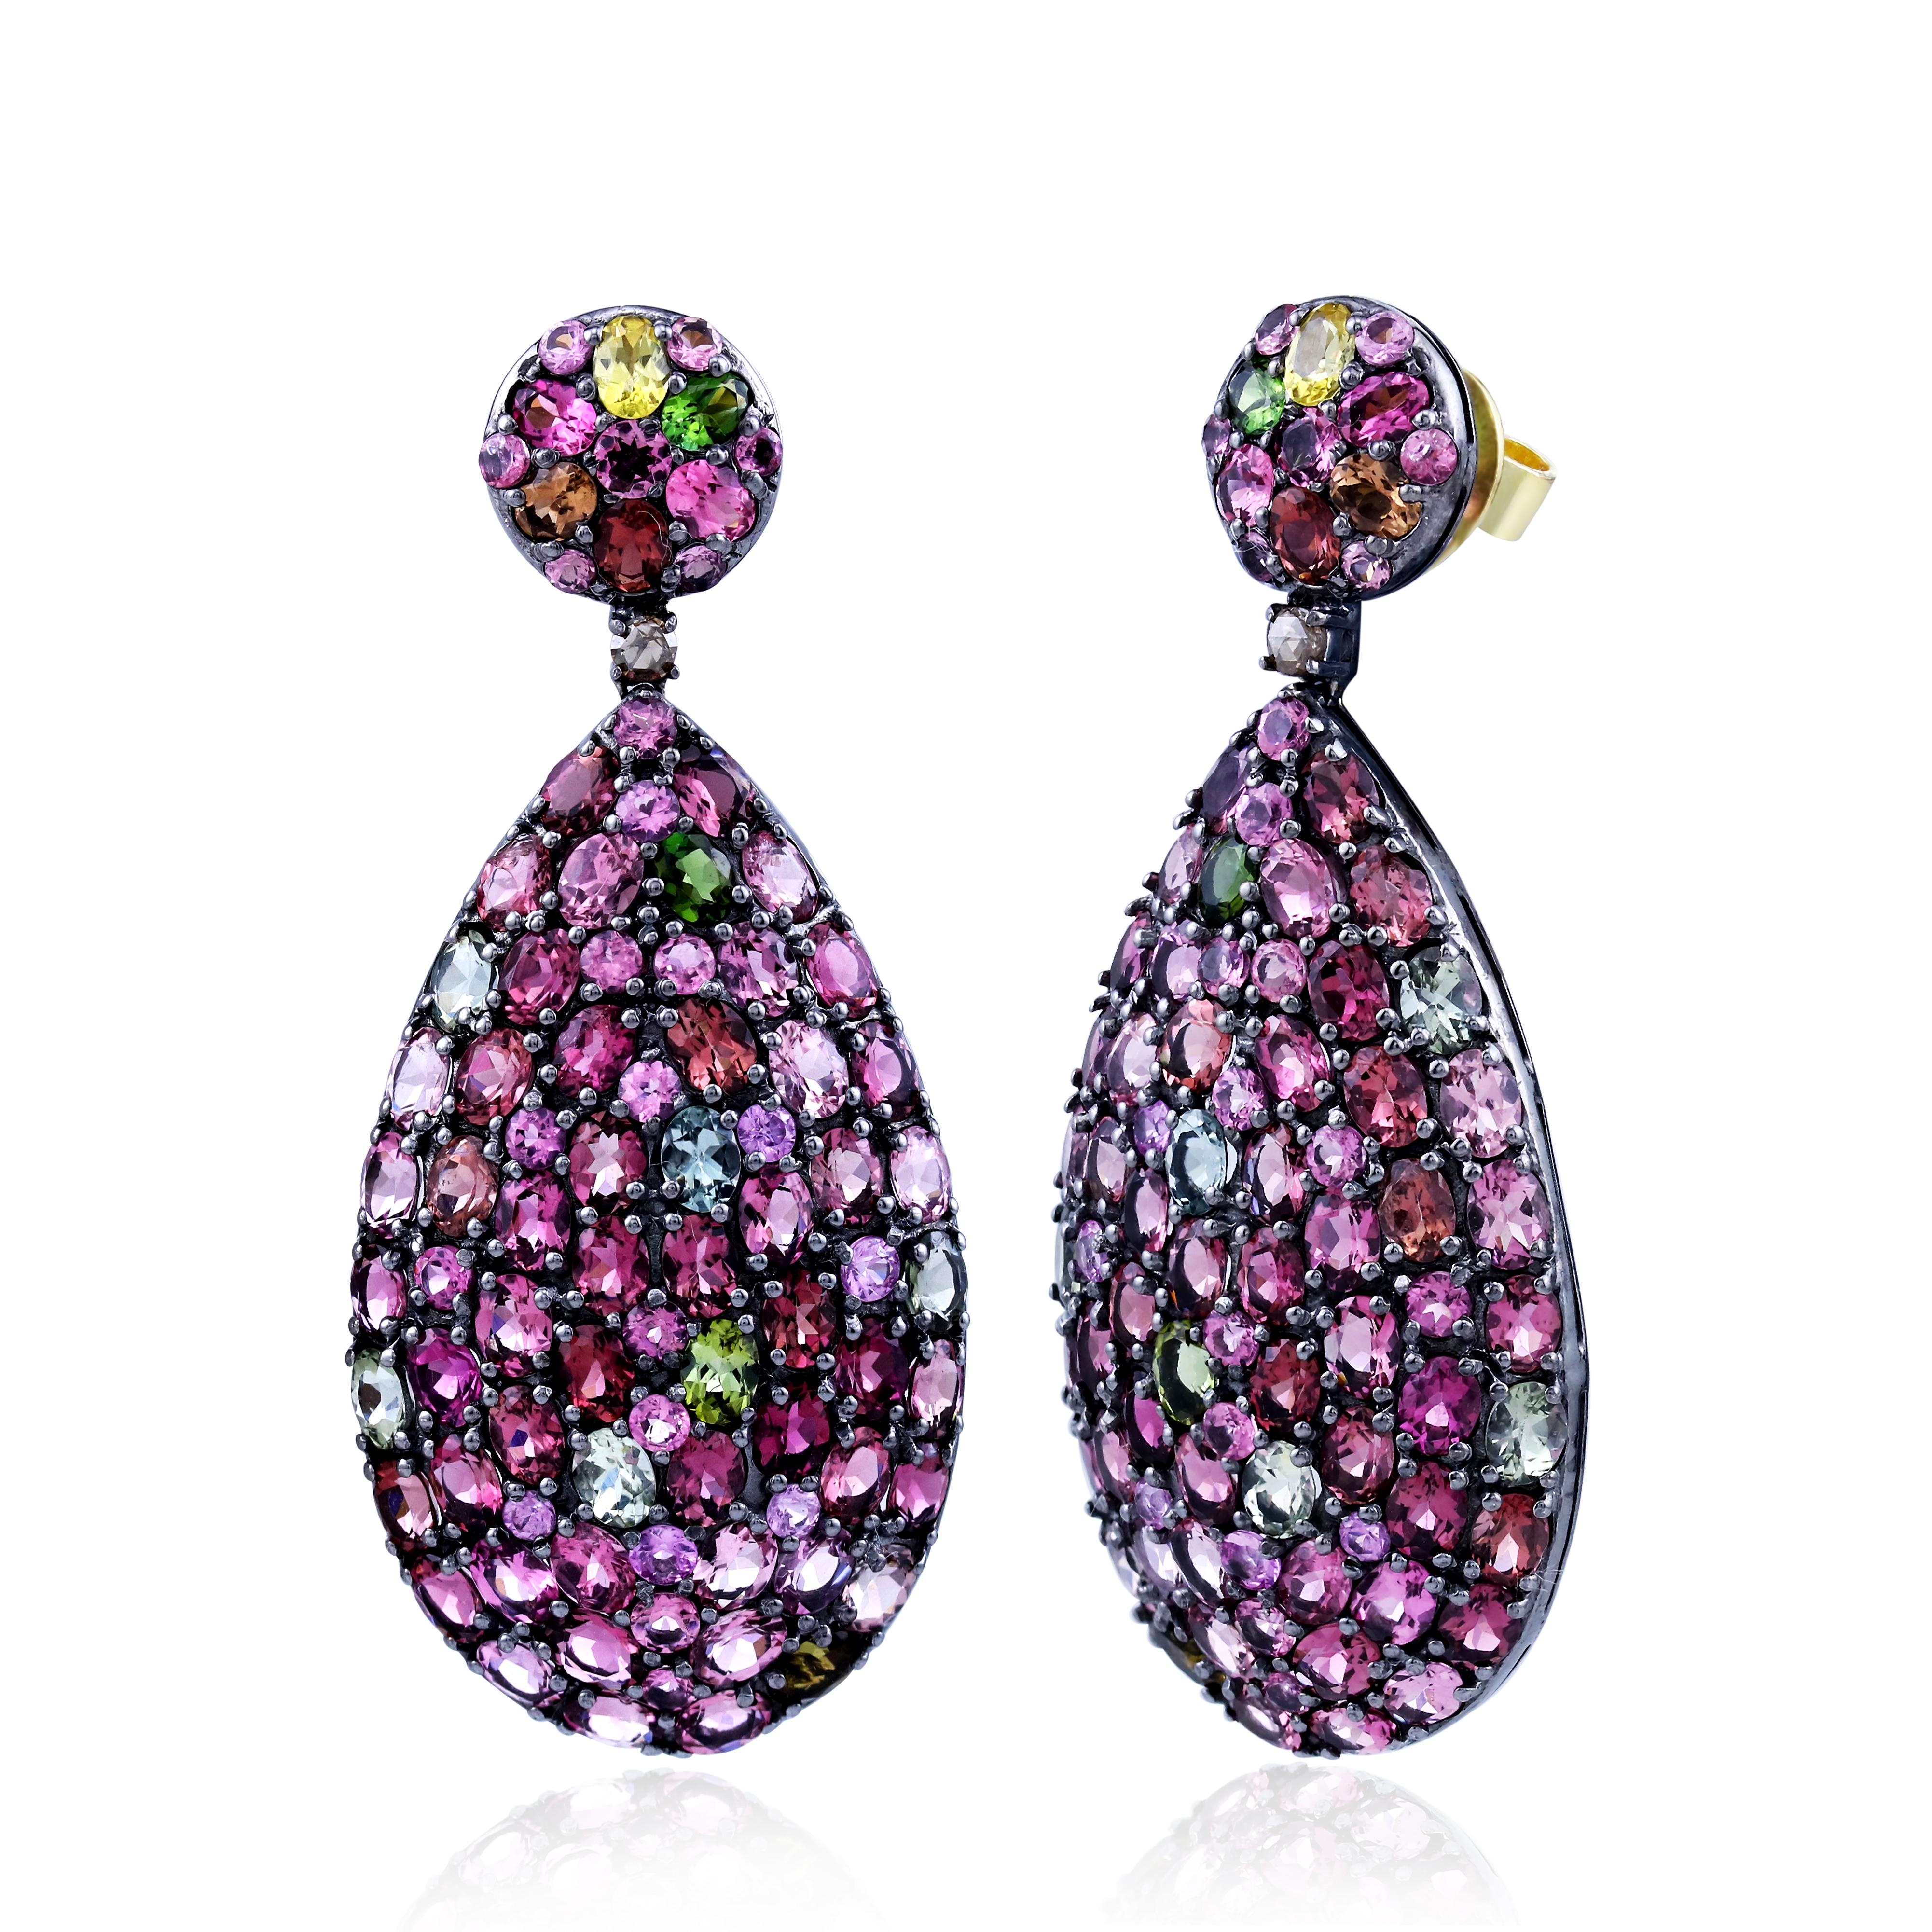 Introducing Gemistry, Victorian 21. 7 Ct. t.w. Pink Tourmaline and Diamond Pear Drop Earrings mounted over 18k White gold and black Rhodium Silver ! These drops are a feast of bright color, scintillating enough to brighten any occasion. Post and